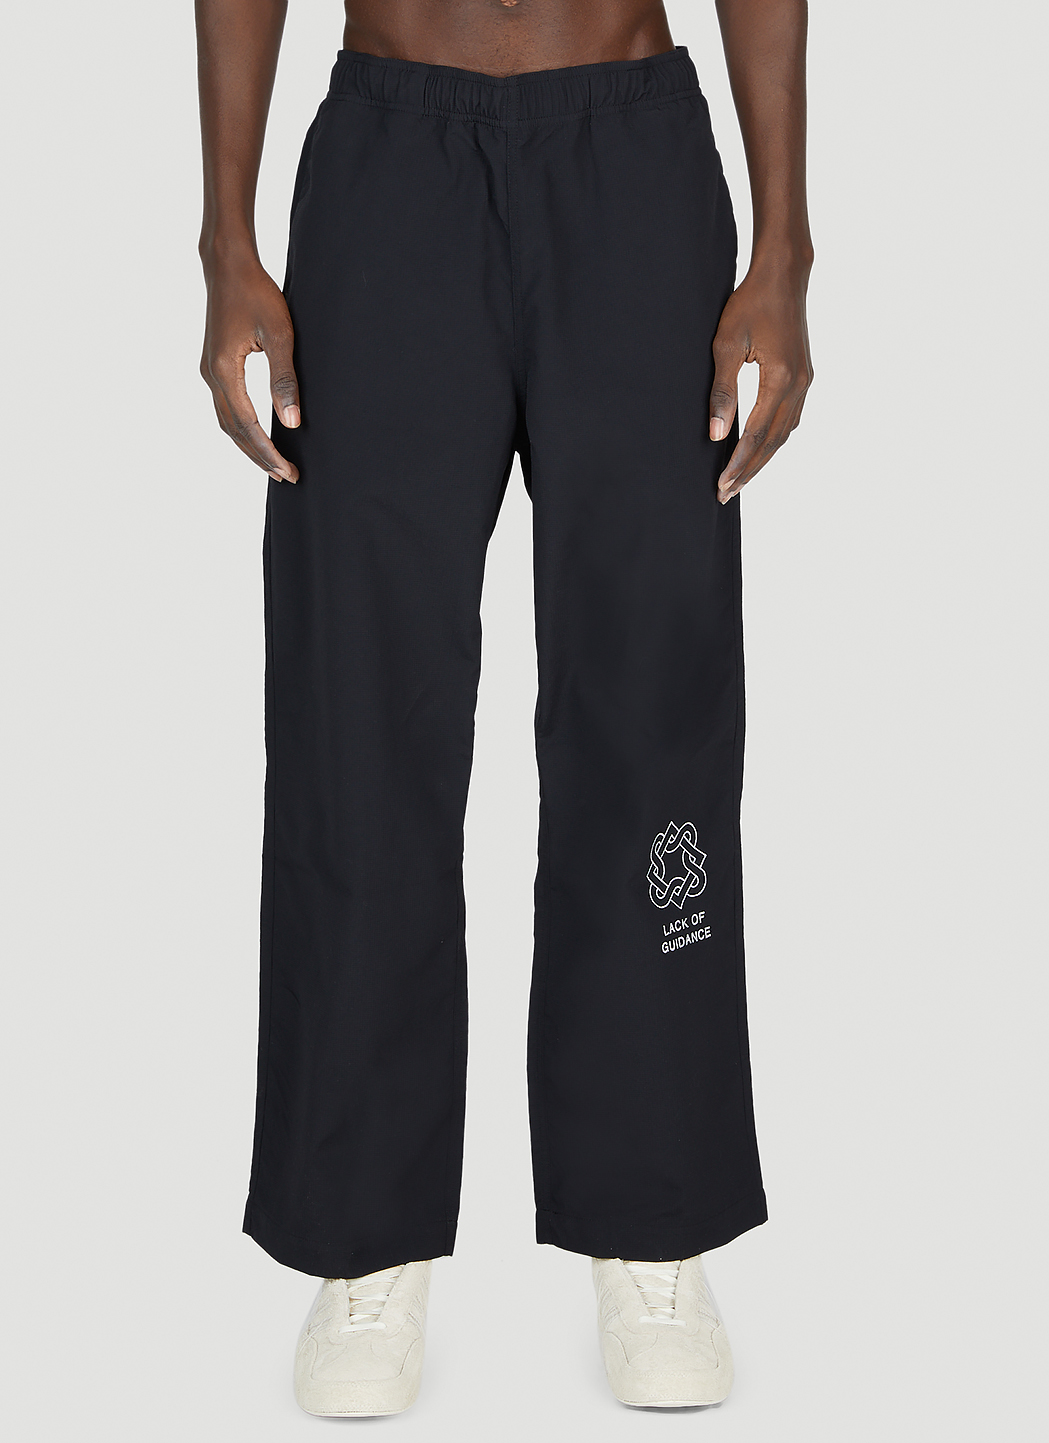 Lack of Guidance Logo Embroidery Track Pants